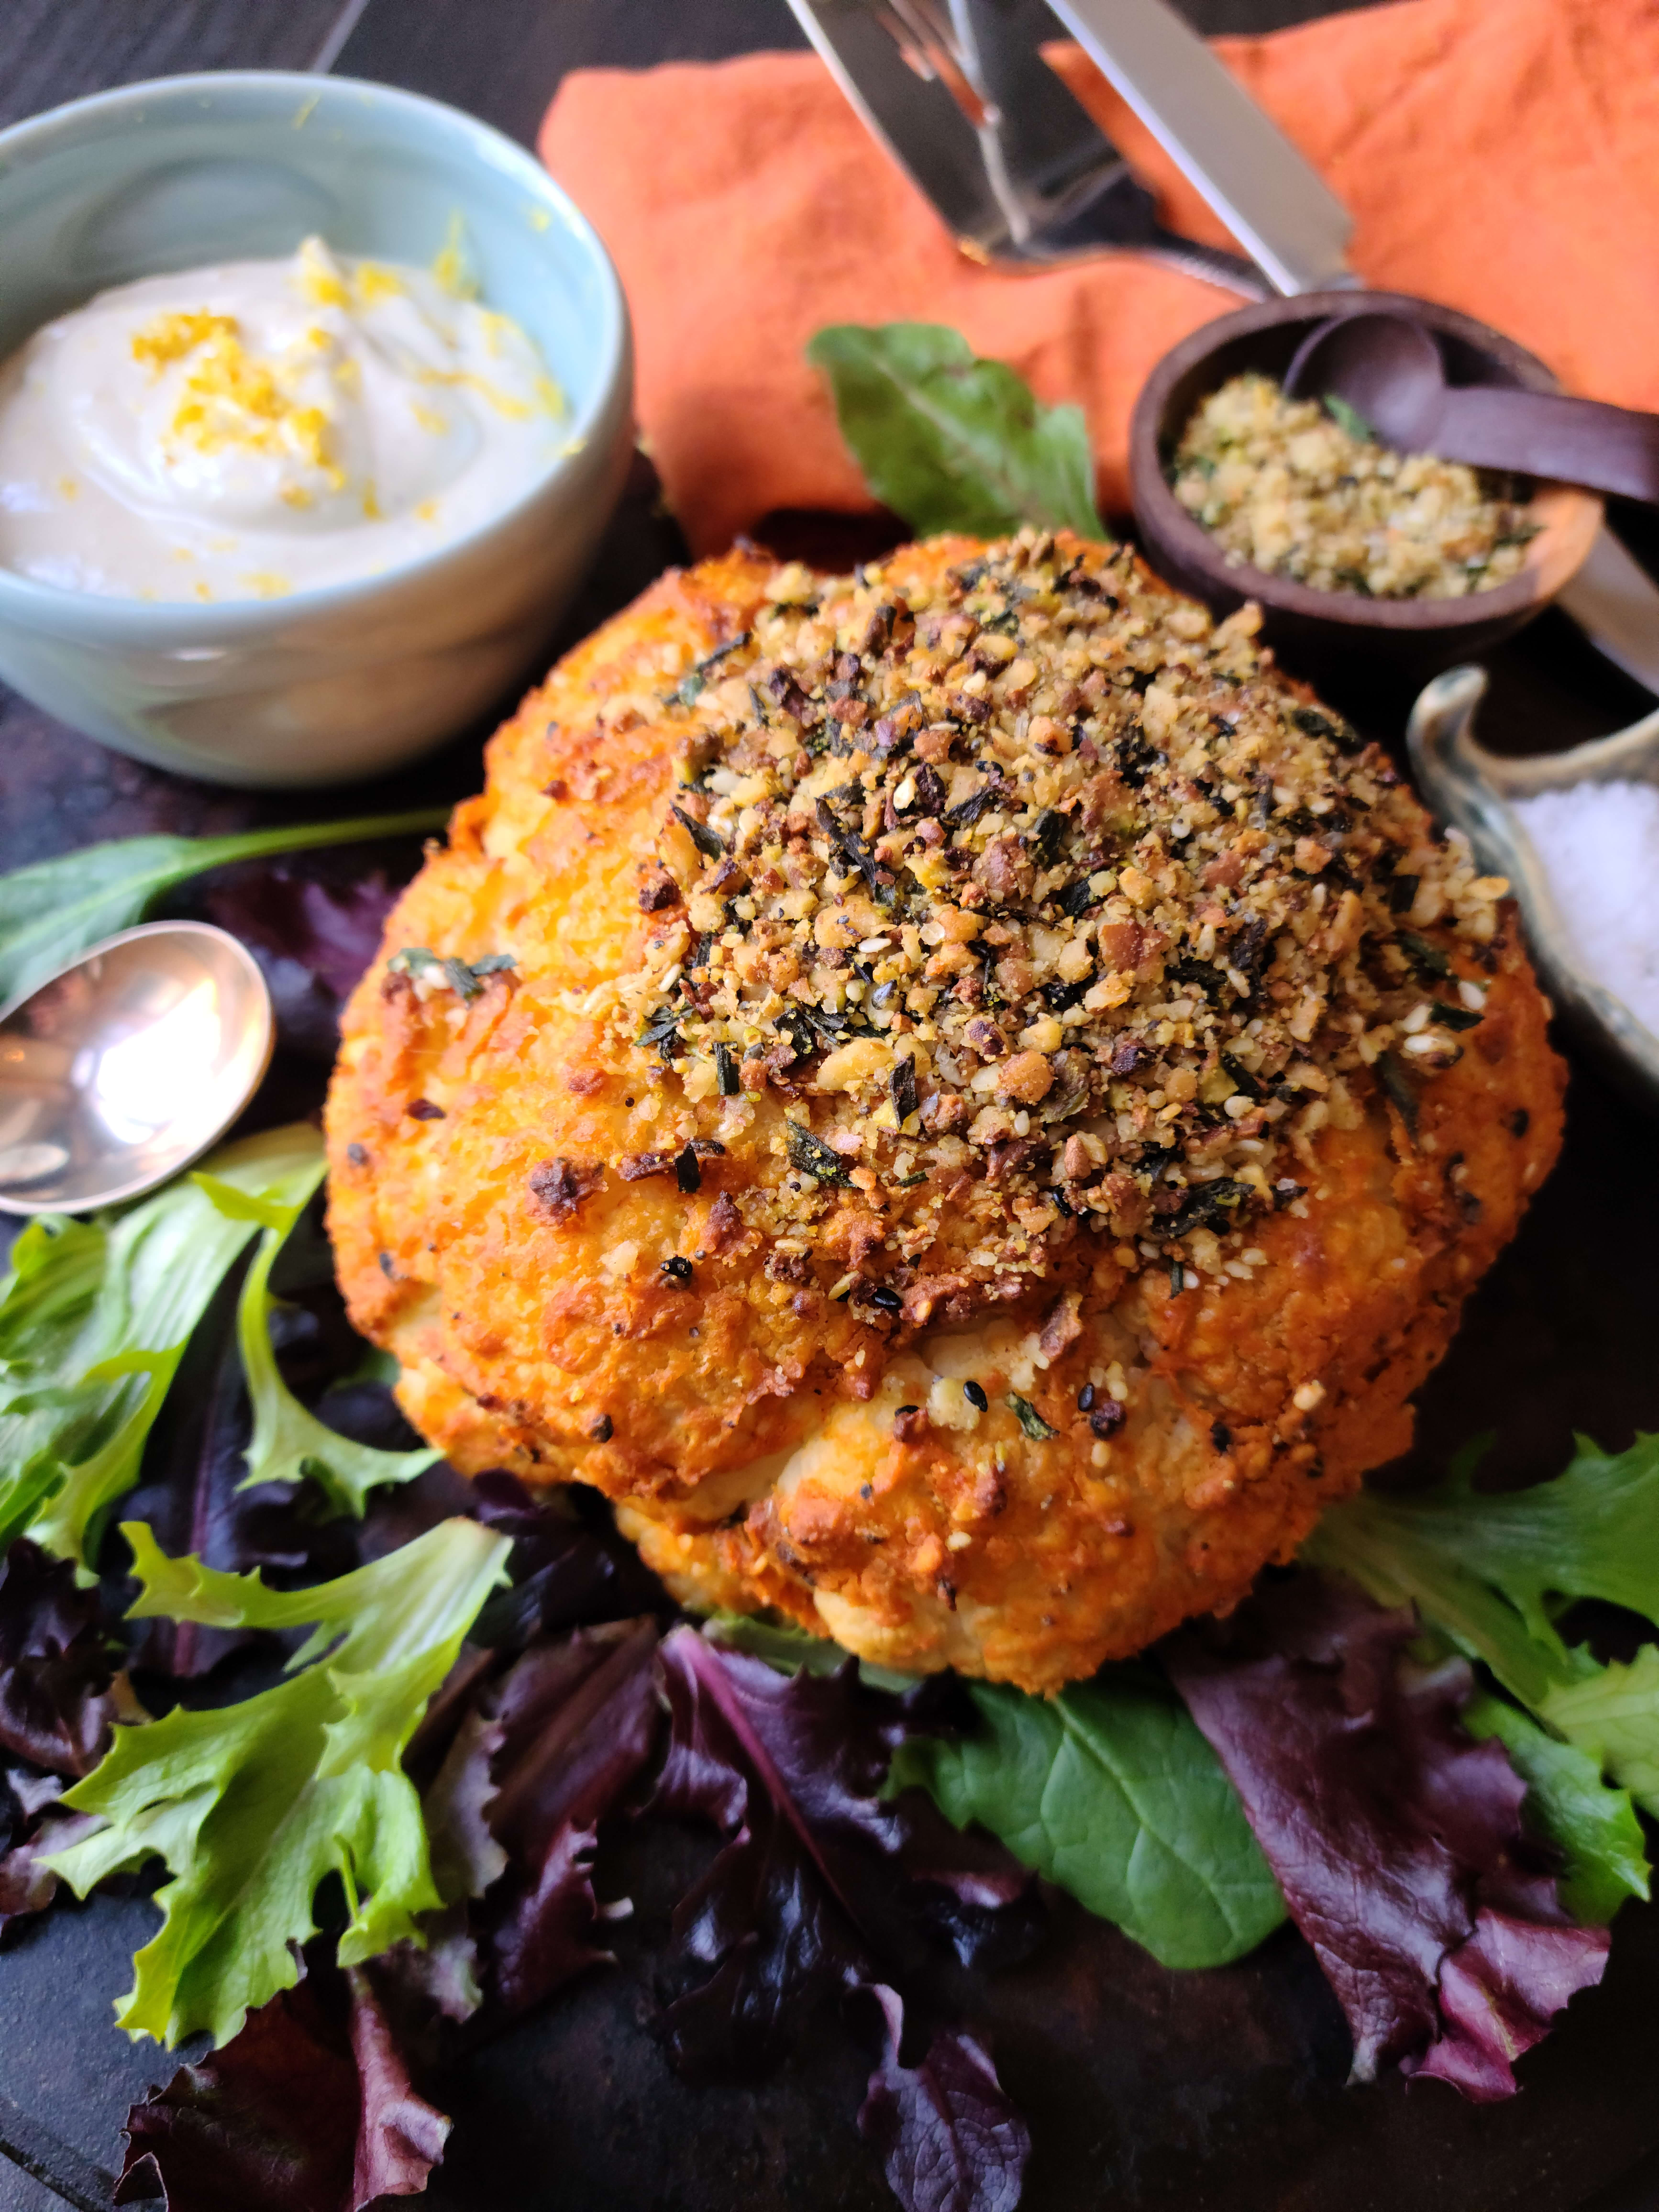 Middle Eastern Whole Roasted Cauliflower with Tofutti Better Than Sour Cream Sauce (vegan/plant-based)